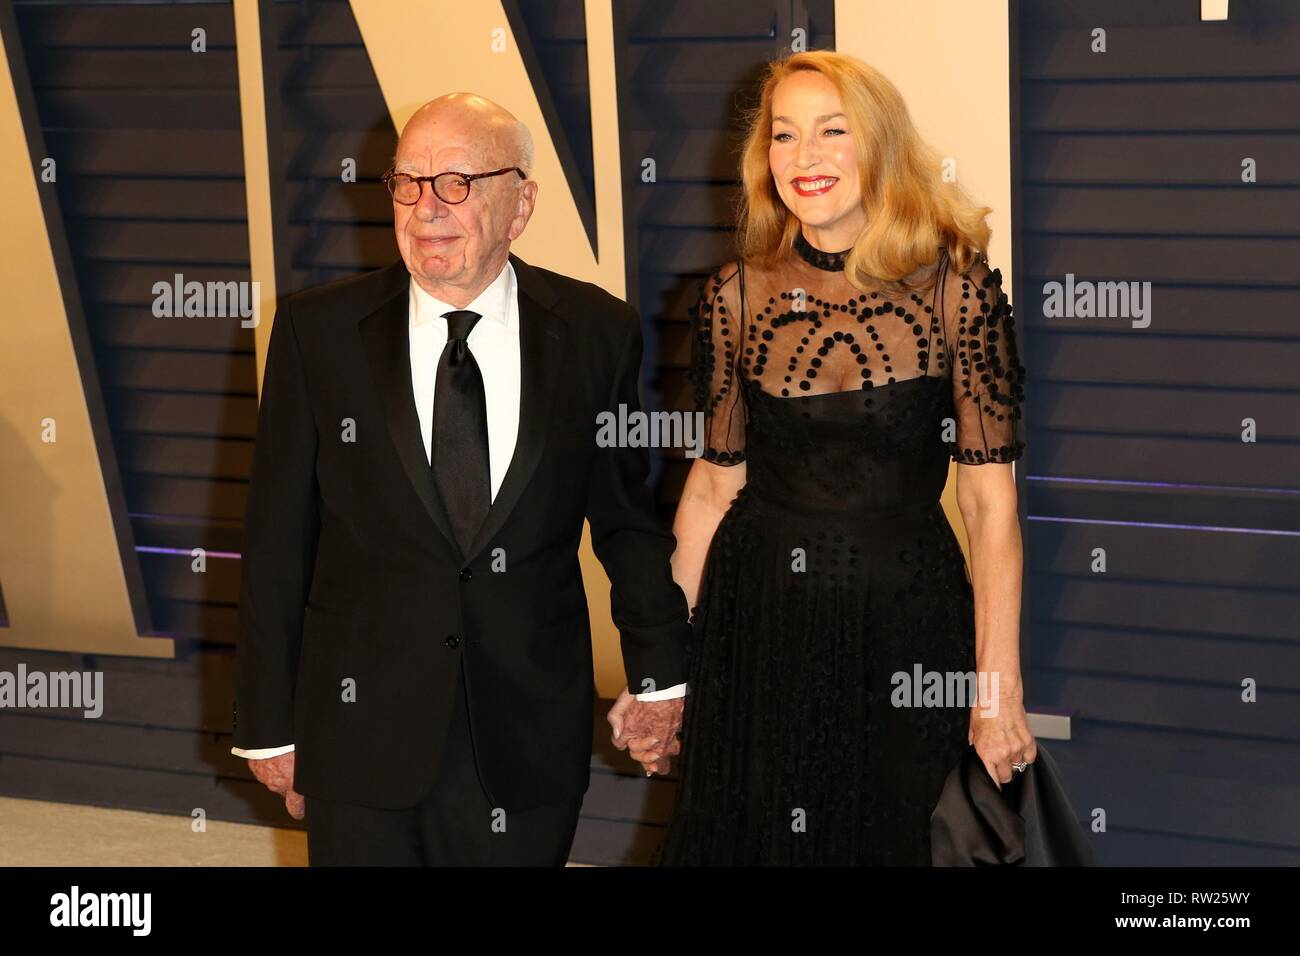 Beverly Hills, CA. 24th Feb, 2019. Rupert Murdoch, Jerry Hall at arrivals for 2019 Vanity Fair Oscar Party, Wallis Annenberg Center for the Performing Arts, Beverly Hills, CA February 24, 2019. Credit: Priscilla Grant/Everett Collection/Alamy Live News Stock Photo